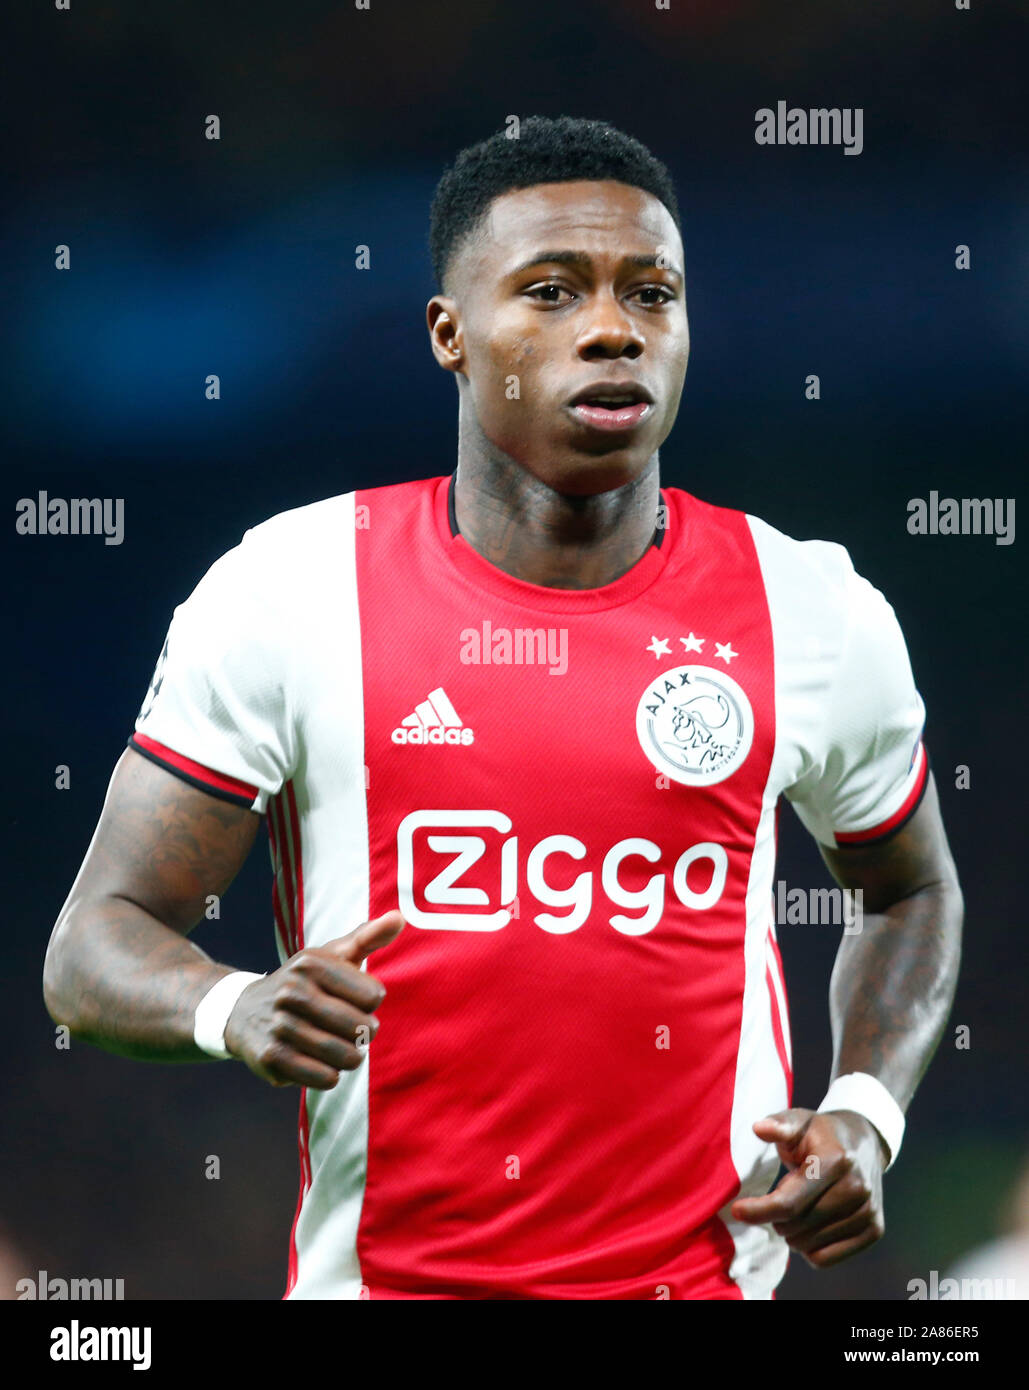 SIGN ALL THE AJAX PLAYERS: Chelsea linked with Quincy Promes - We